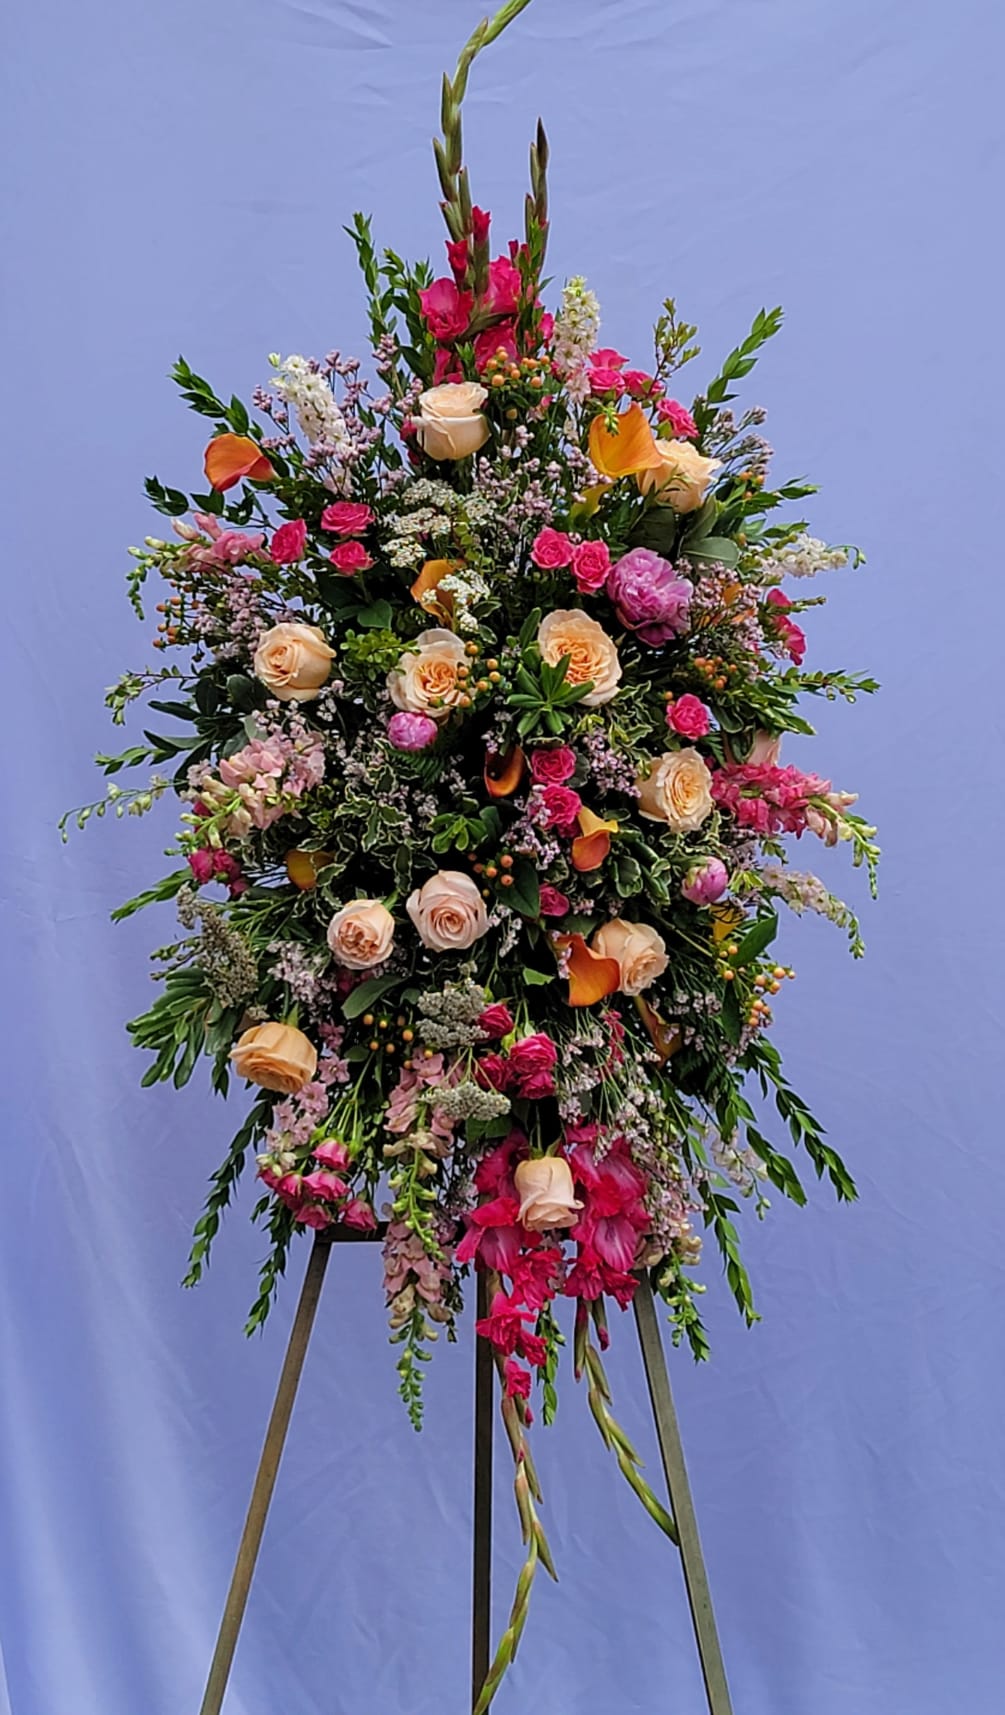 This bright and elegant sympathy piece features gladiolas, roses and more in